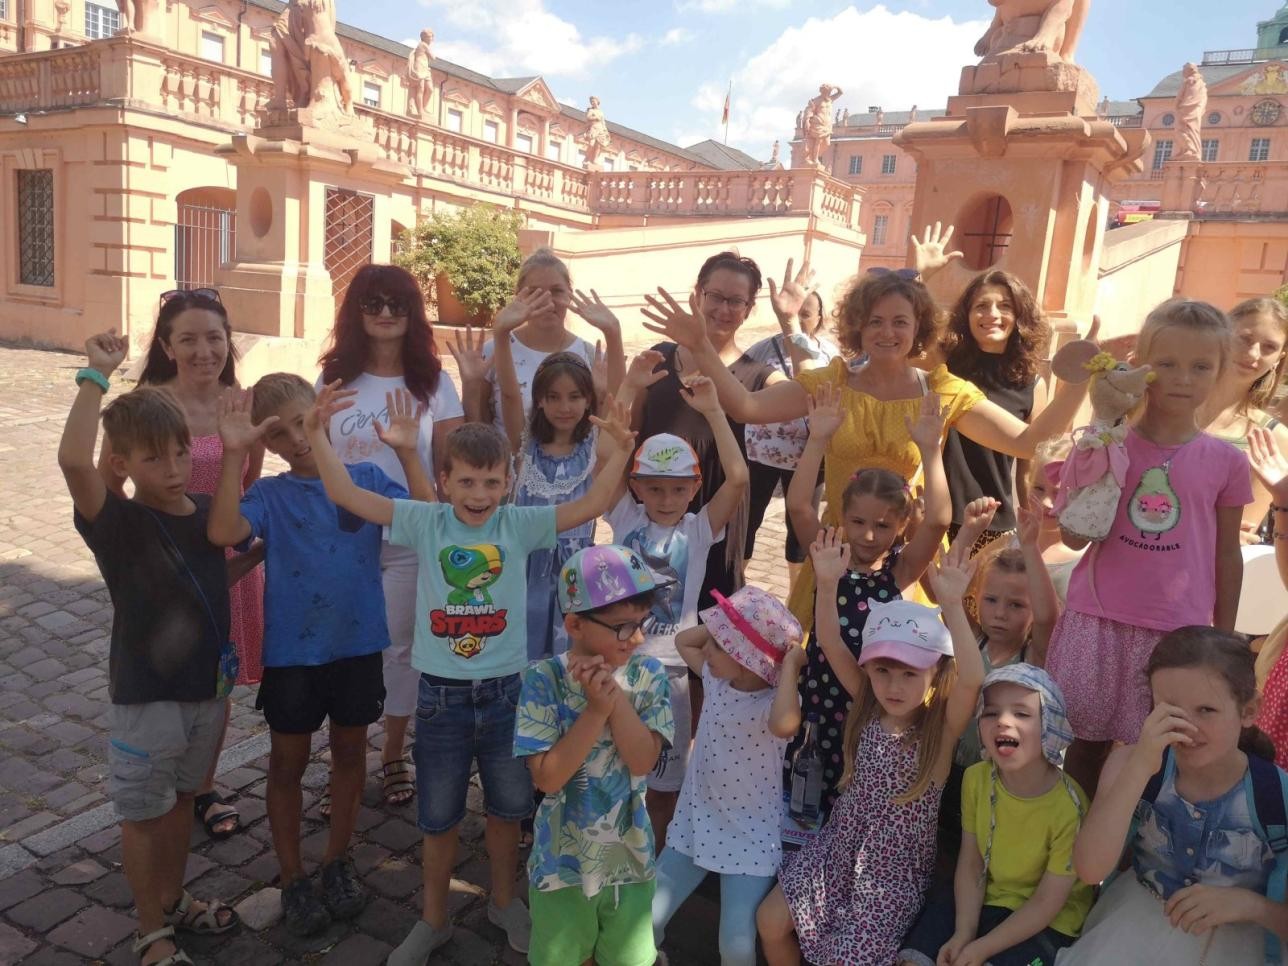 Children with chaperones on a city tour in front of Rastatt Castle